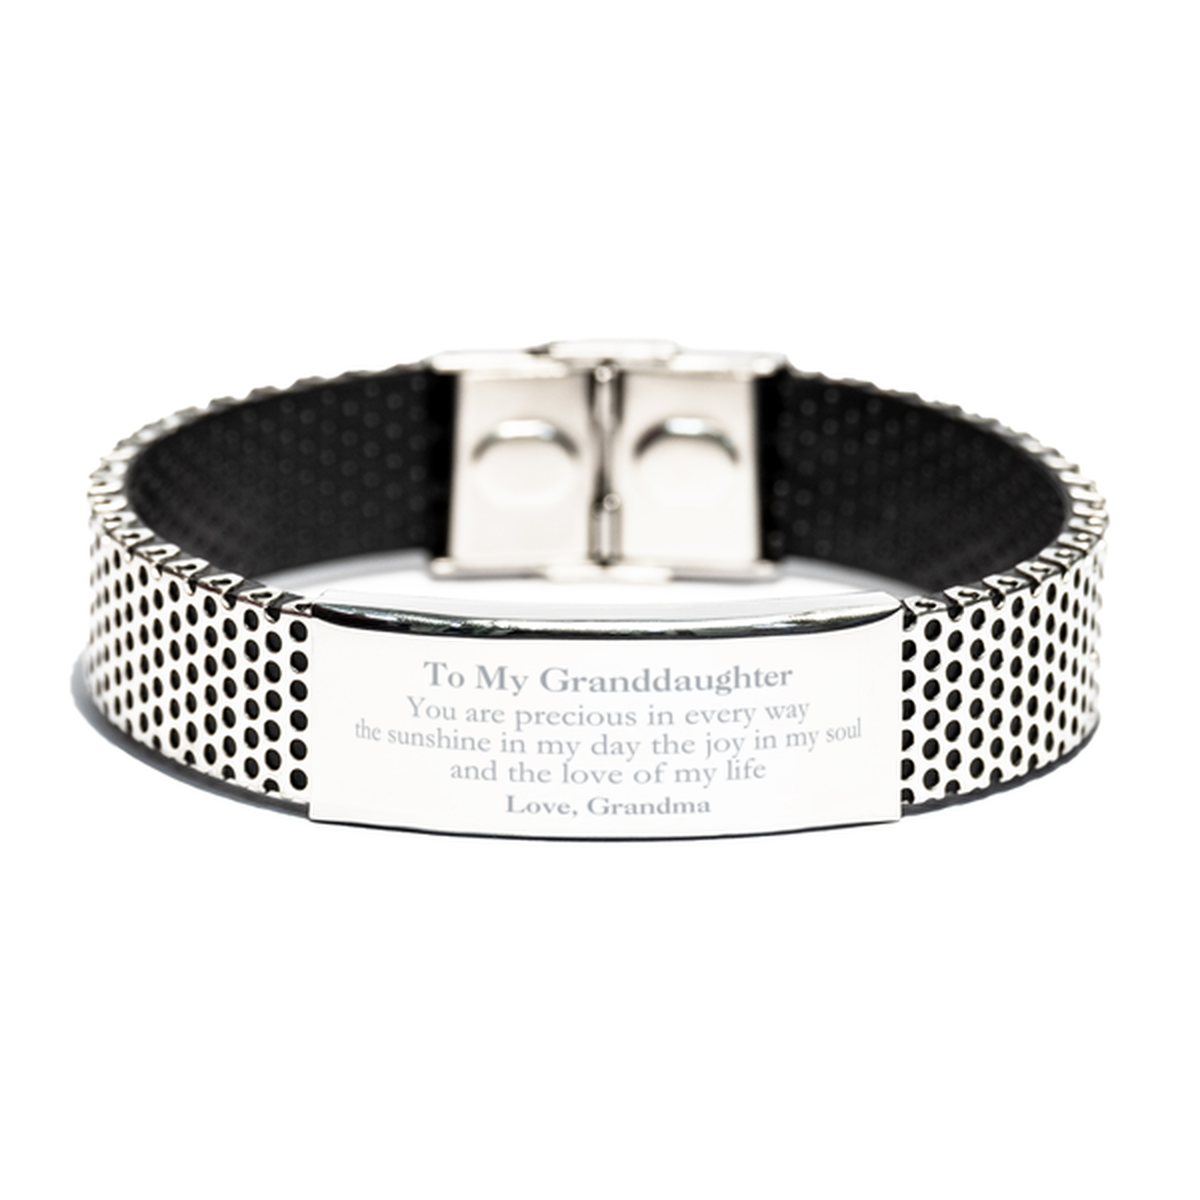 Graduation Gifts for Granddaughter Stainless Steel Bracelet Present from Grandma, Christmas Granddaughter Birthday Gifts Granddaughter You are precious in every way the sunshine in my day. Love, Grandma